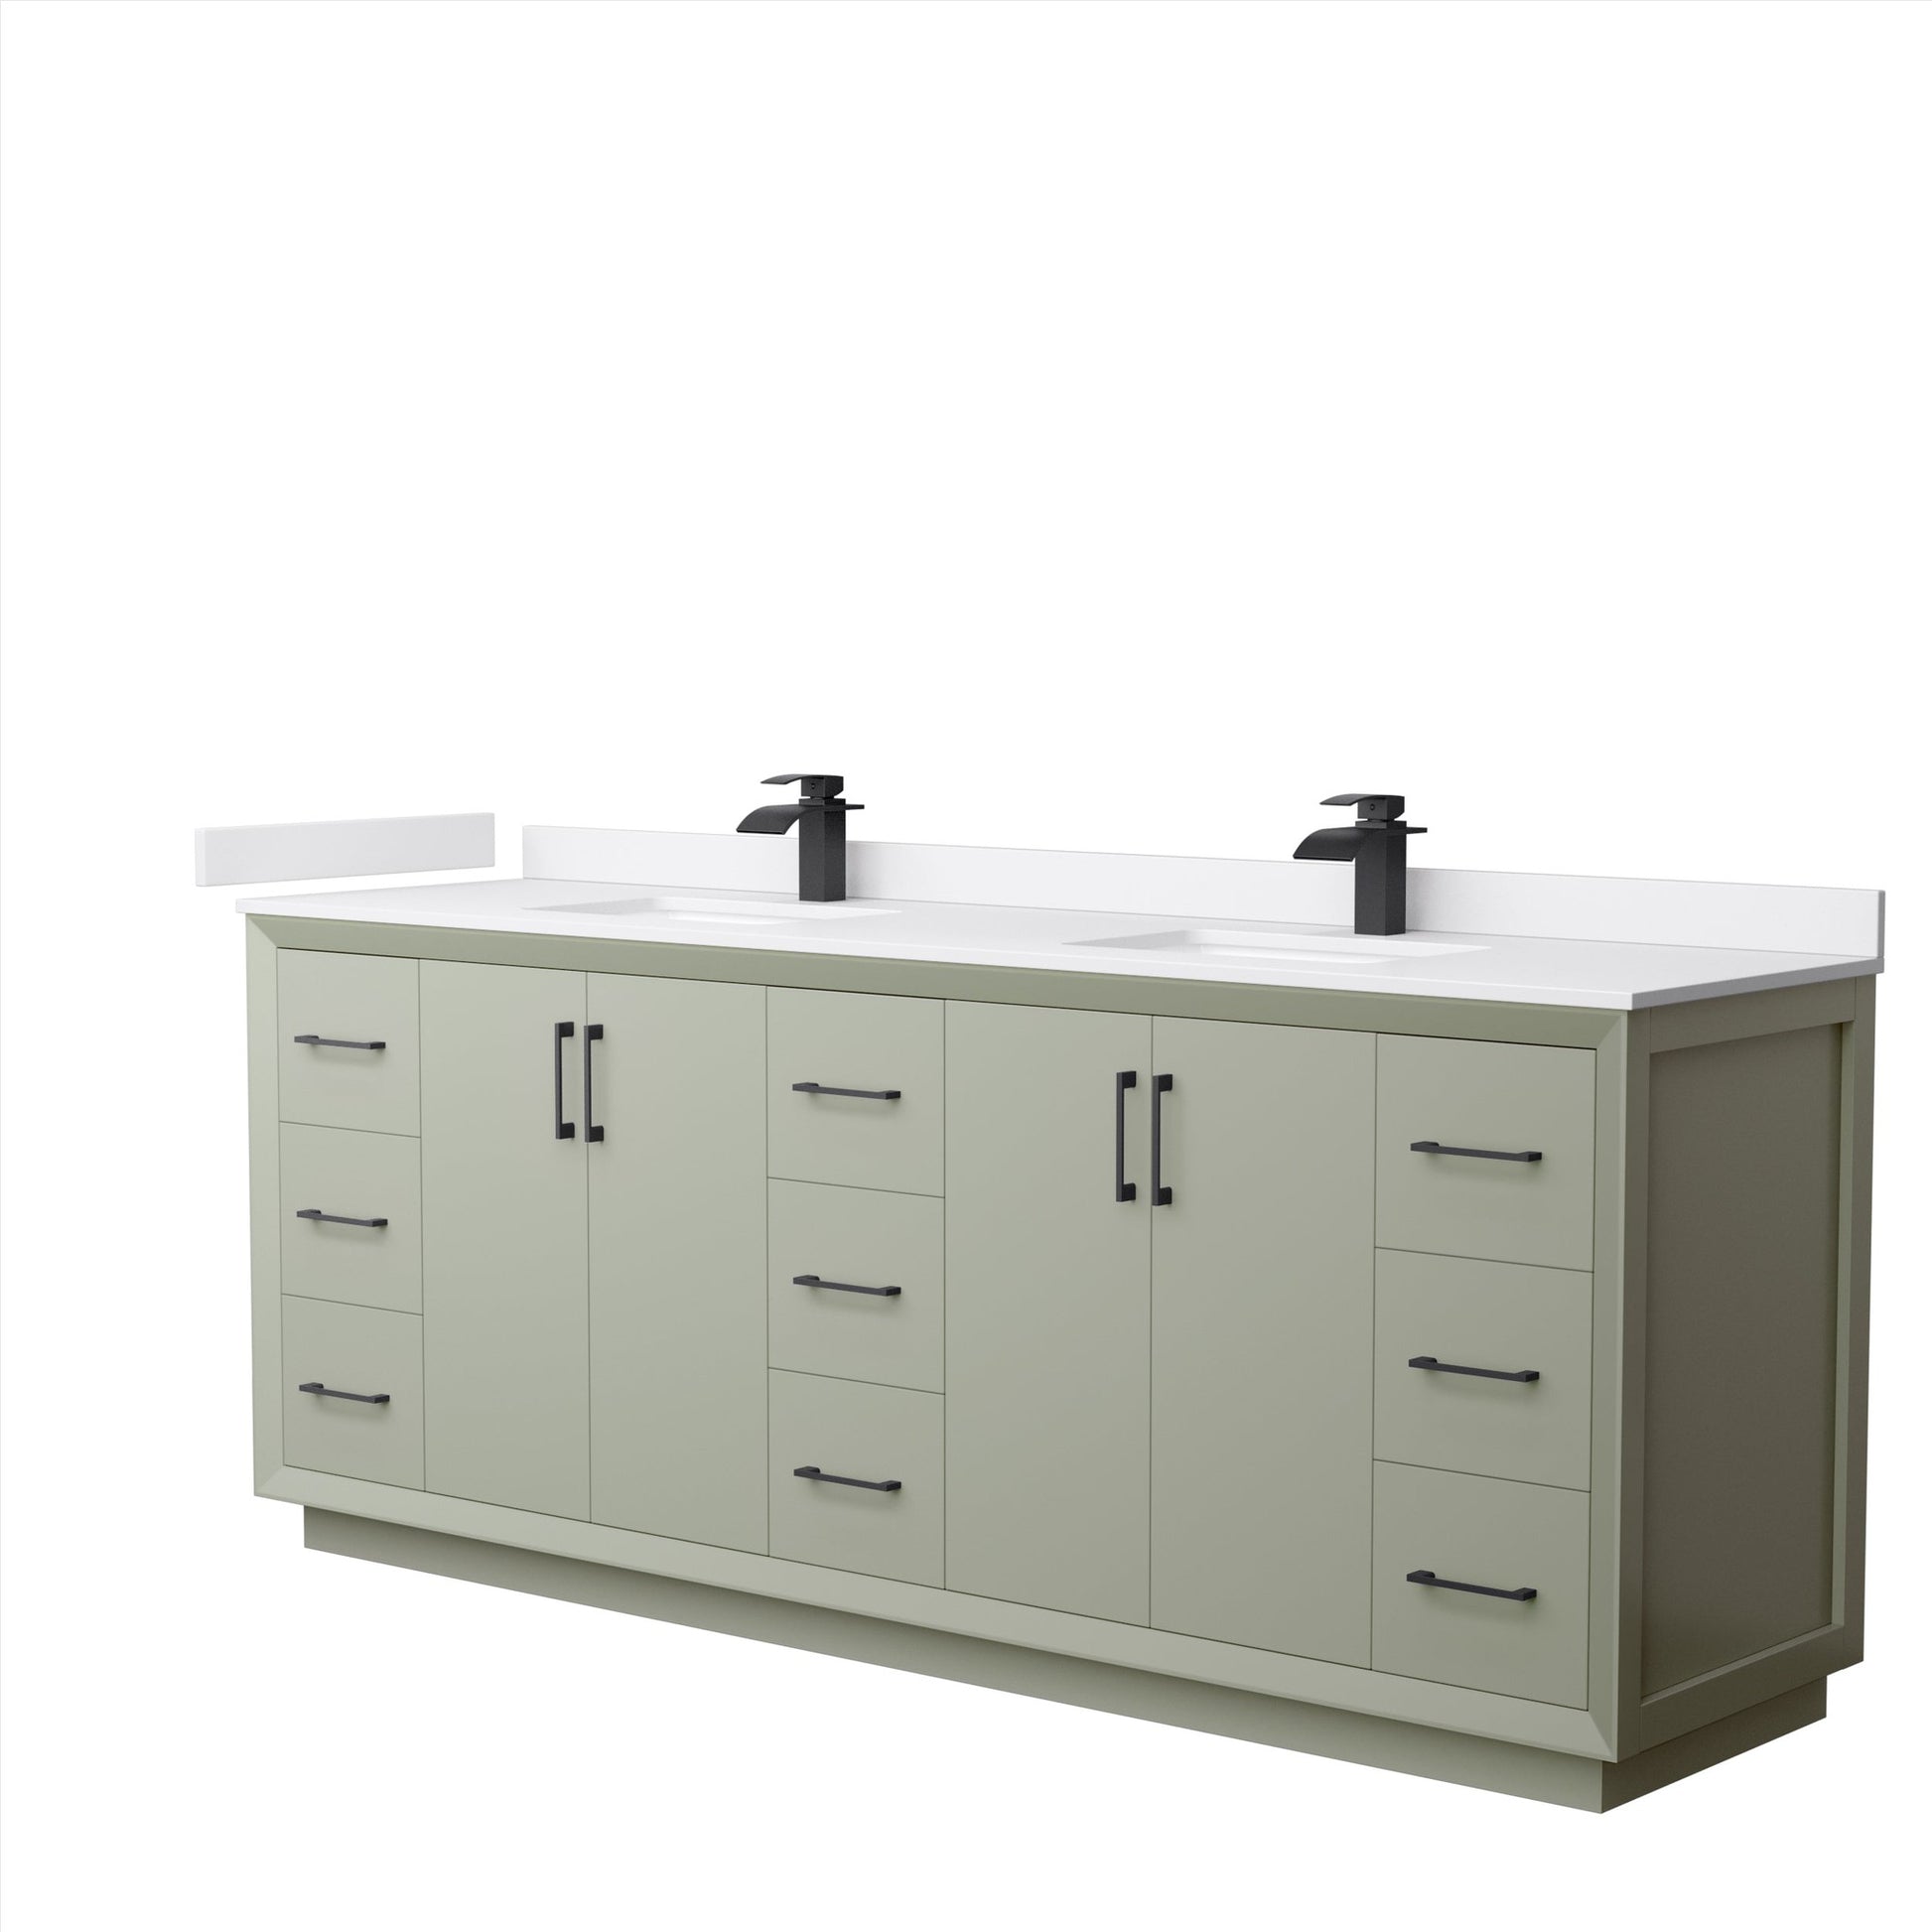 Wyndham Collection Strada 84" Double Bathroom Vanity in Light Green, White Cultured Marble Countertop, Undermount Square Sinks, Matte Black Trim